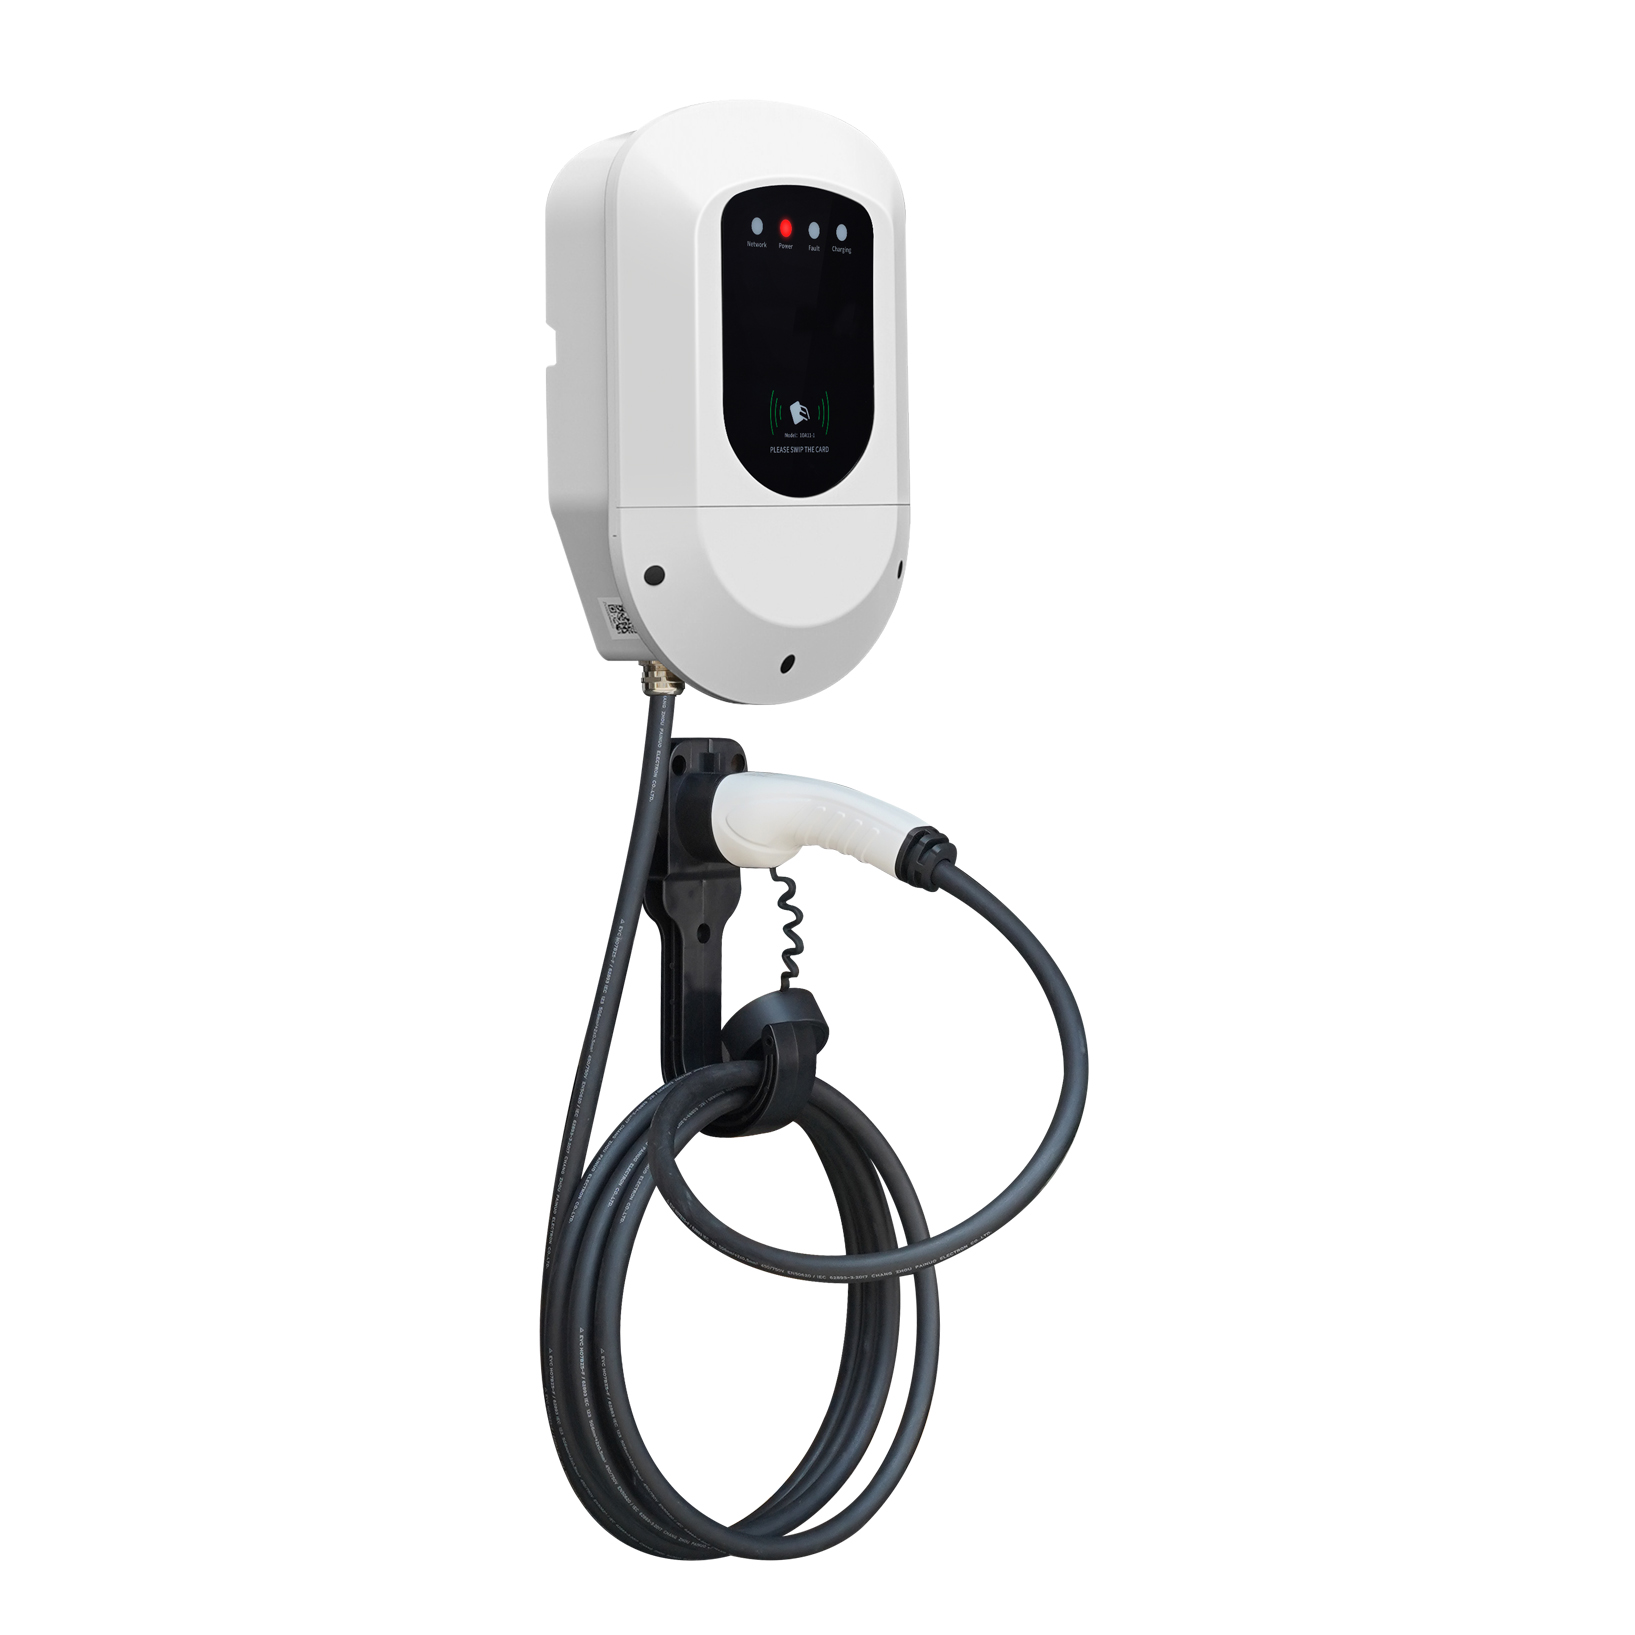 EV charging station wall mounted and column mounted charge point